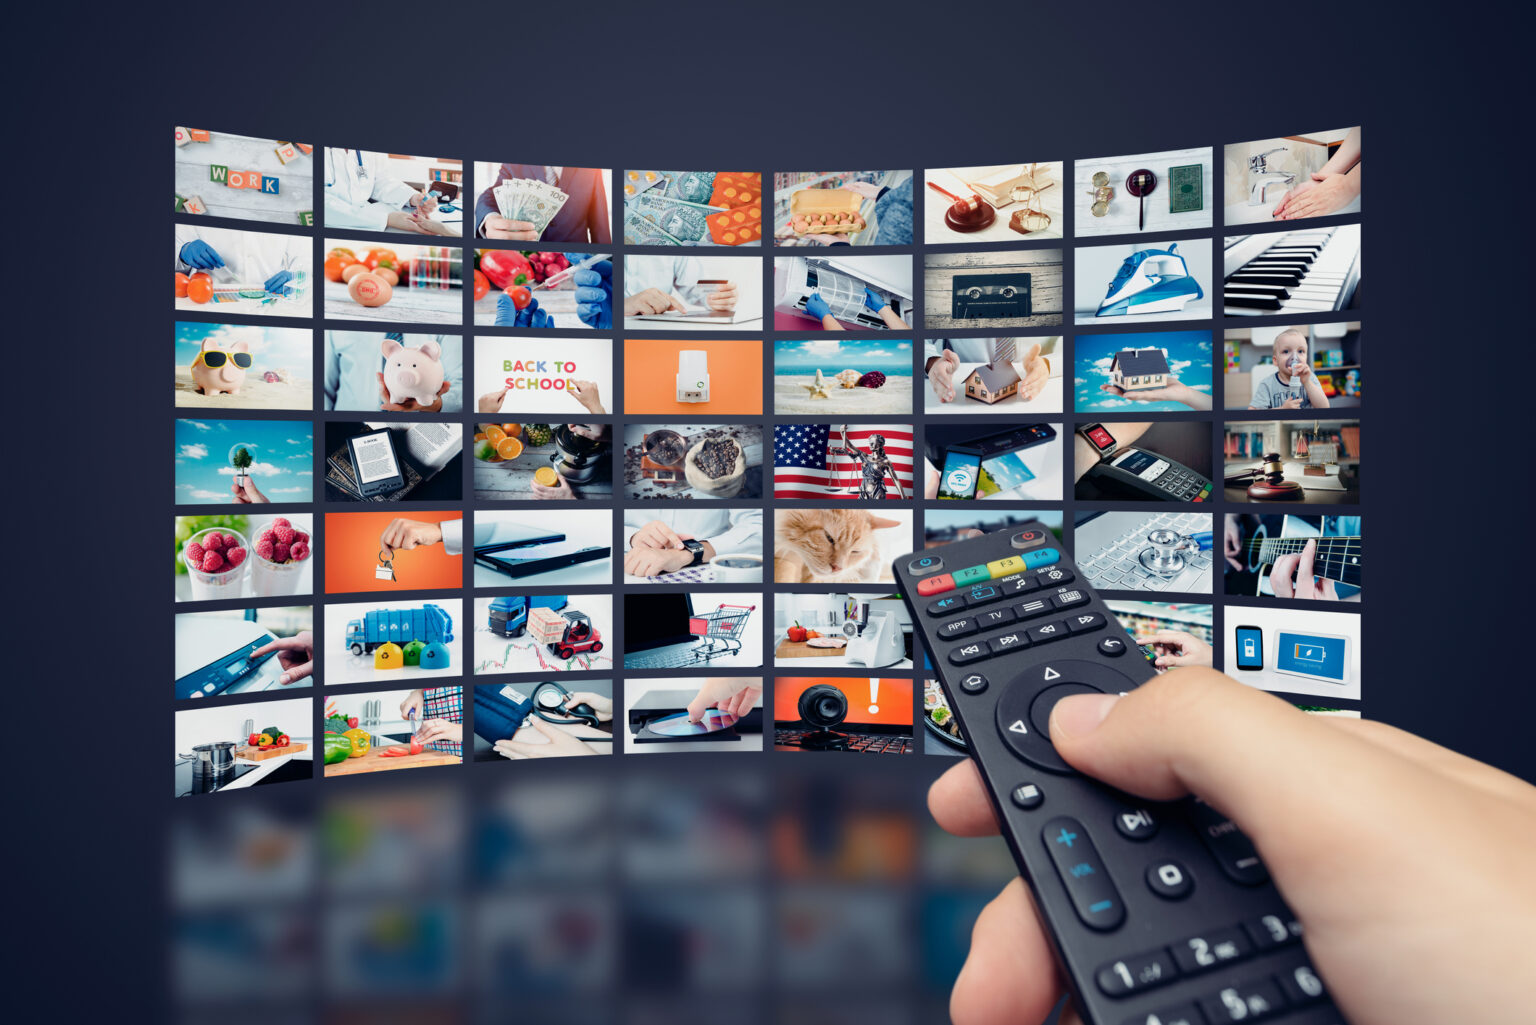 Broadcast and cable make up less than half of TV usage for first time